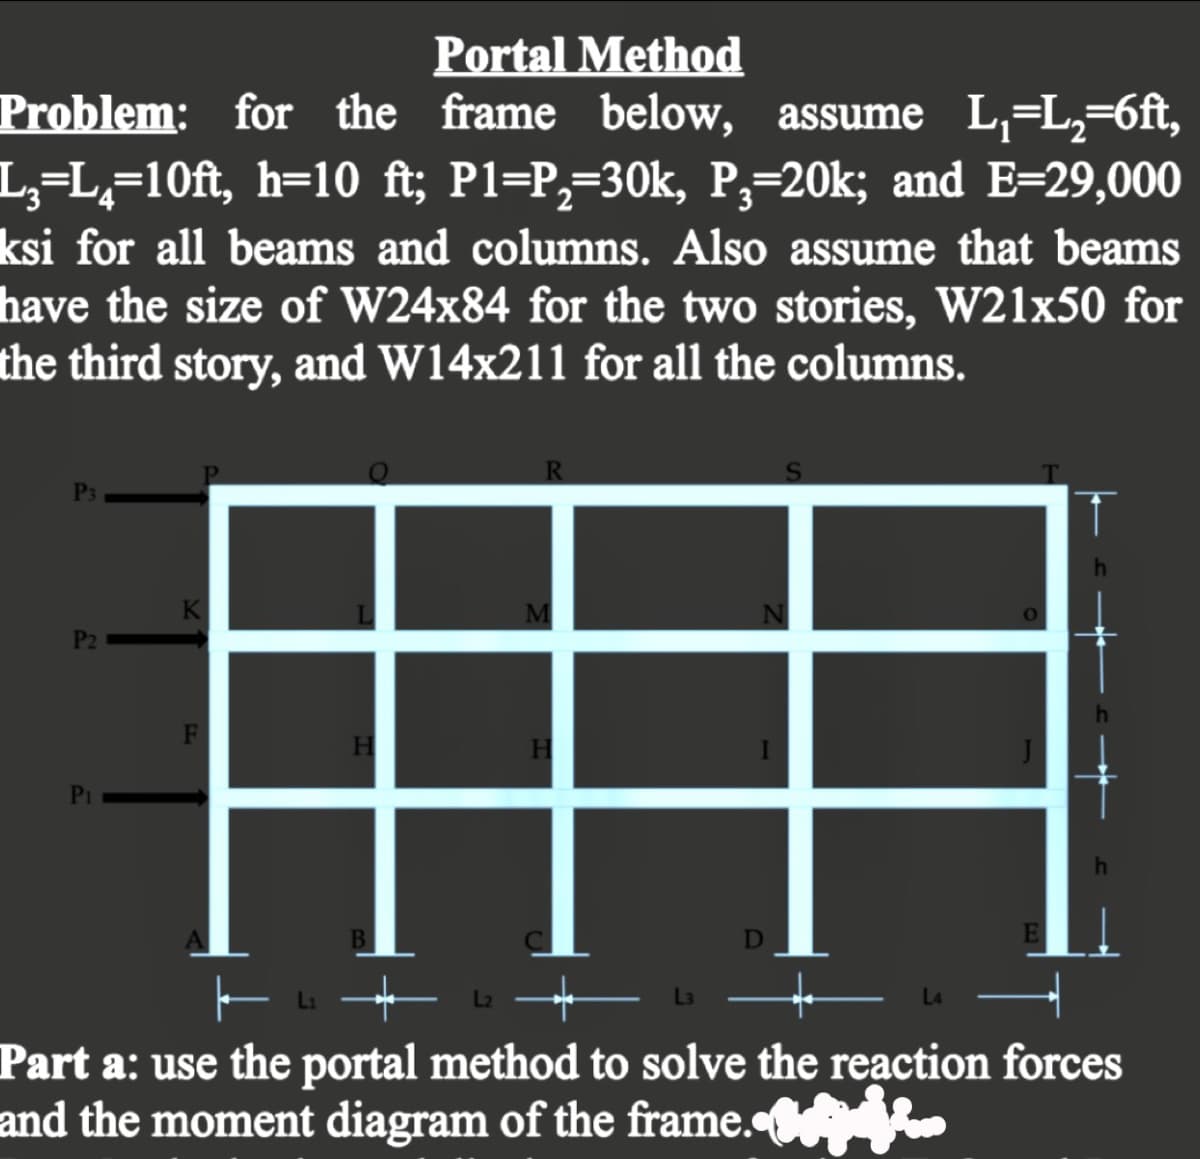 Portal Method
Problem: for the frame below, assume L₁=L₂=6ft,
L3=L₁=10ft, h=10 ft; P1=P,₂=30k, P,=20k; and E=29,000
ksi for all beams and columns. Also assume that beams
have the size of W24x84 for the two stories, W21x50 for
the third story, and W14x211 for all the columns.
P2
K
F
R
H
O
D
h
I
Part a: use the portal method to solve the reaction forces
and the moment diagram of the frame. in fi.
h